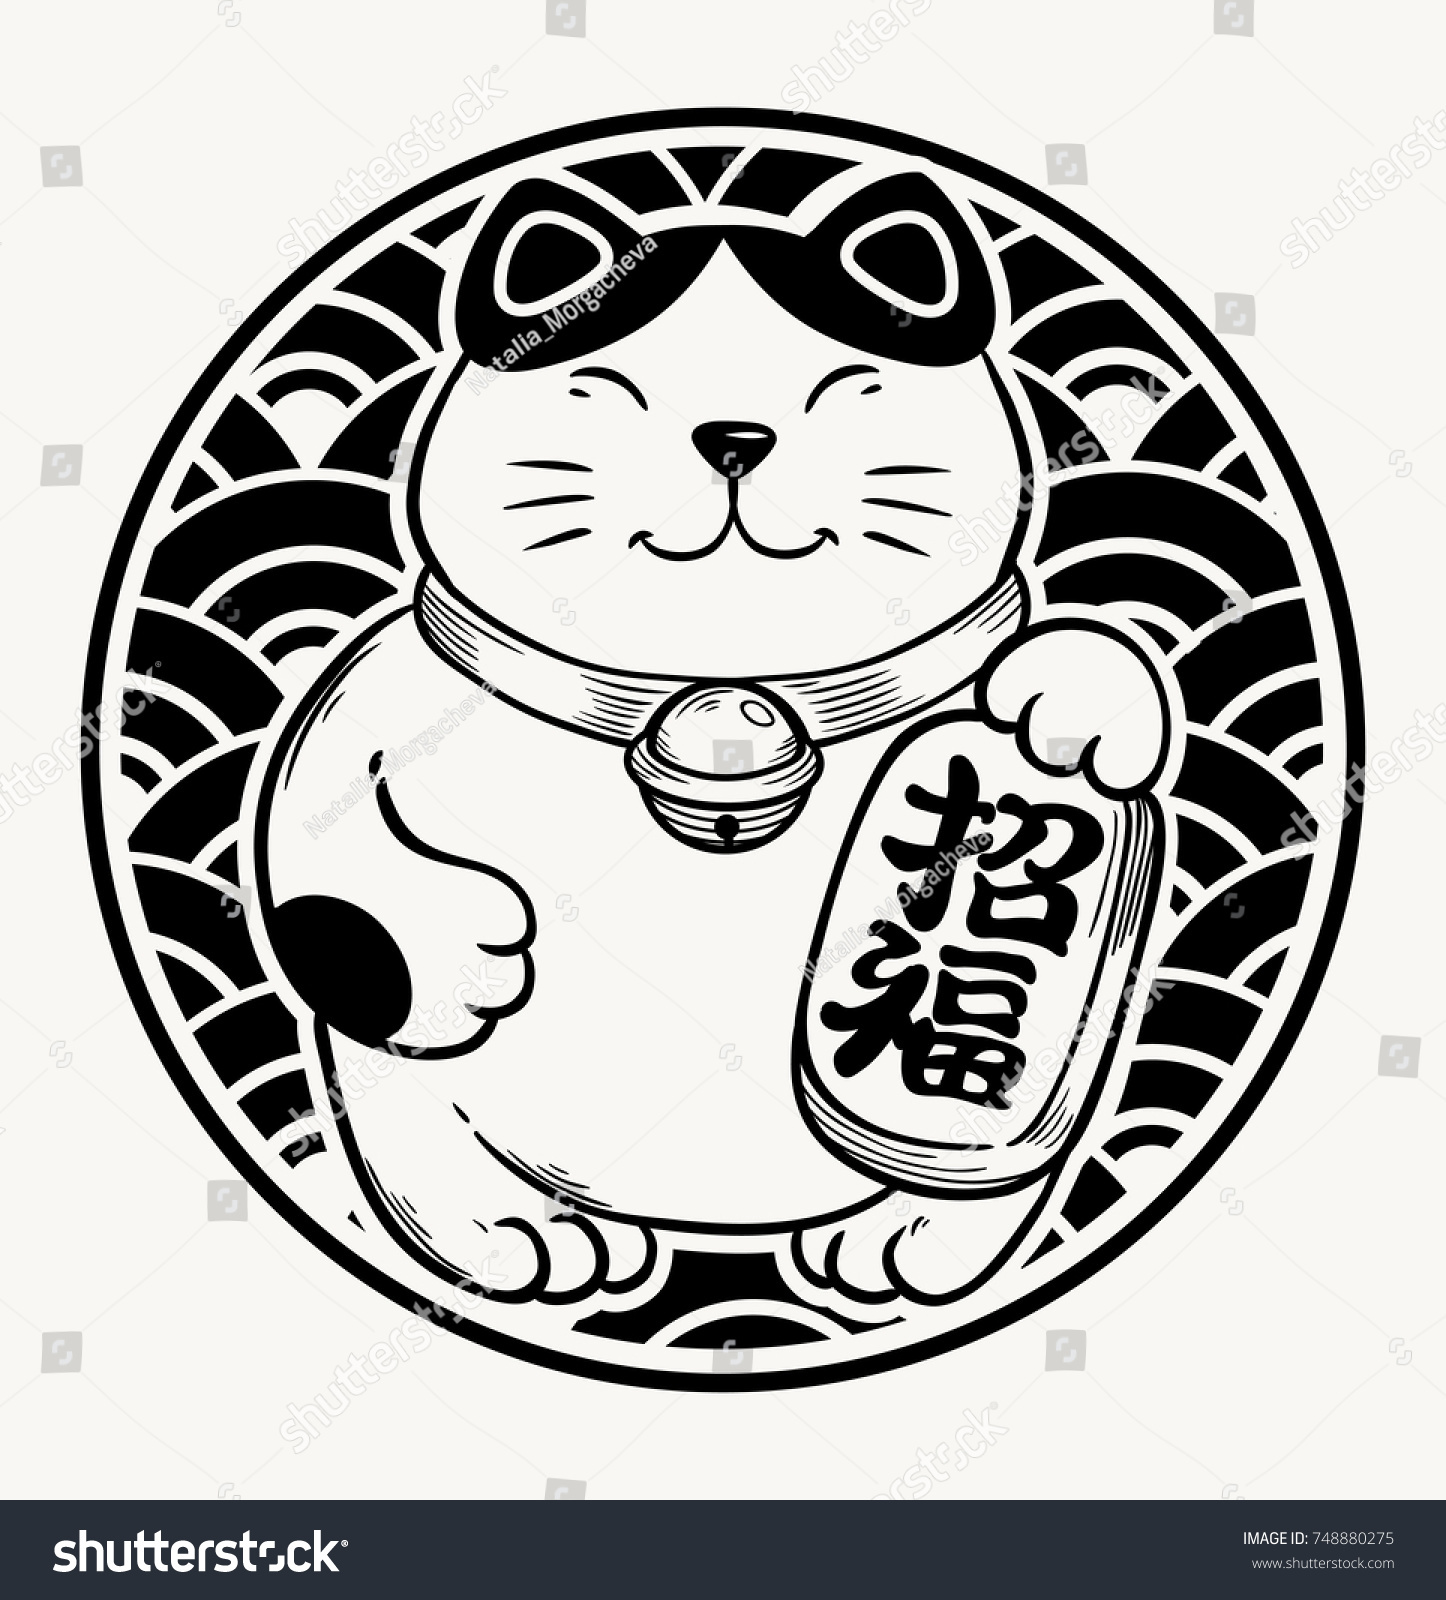 SVG of Maneki-neko. Sitting hand drawn lucky white cat. Japanese culture. Doodle drawing. Vector illustration, tattoo, art for print, posters, t-shirts and textiles svg